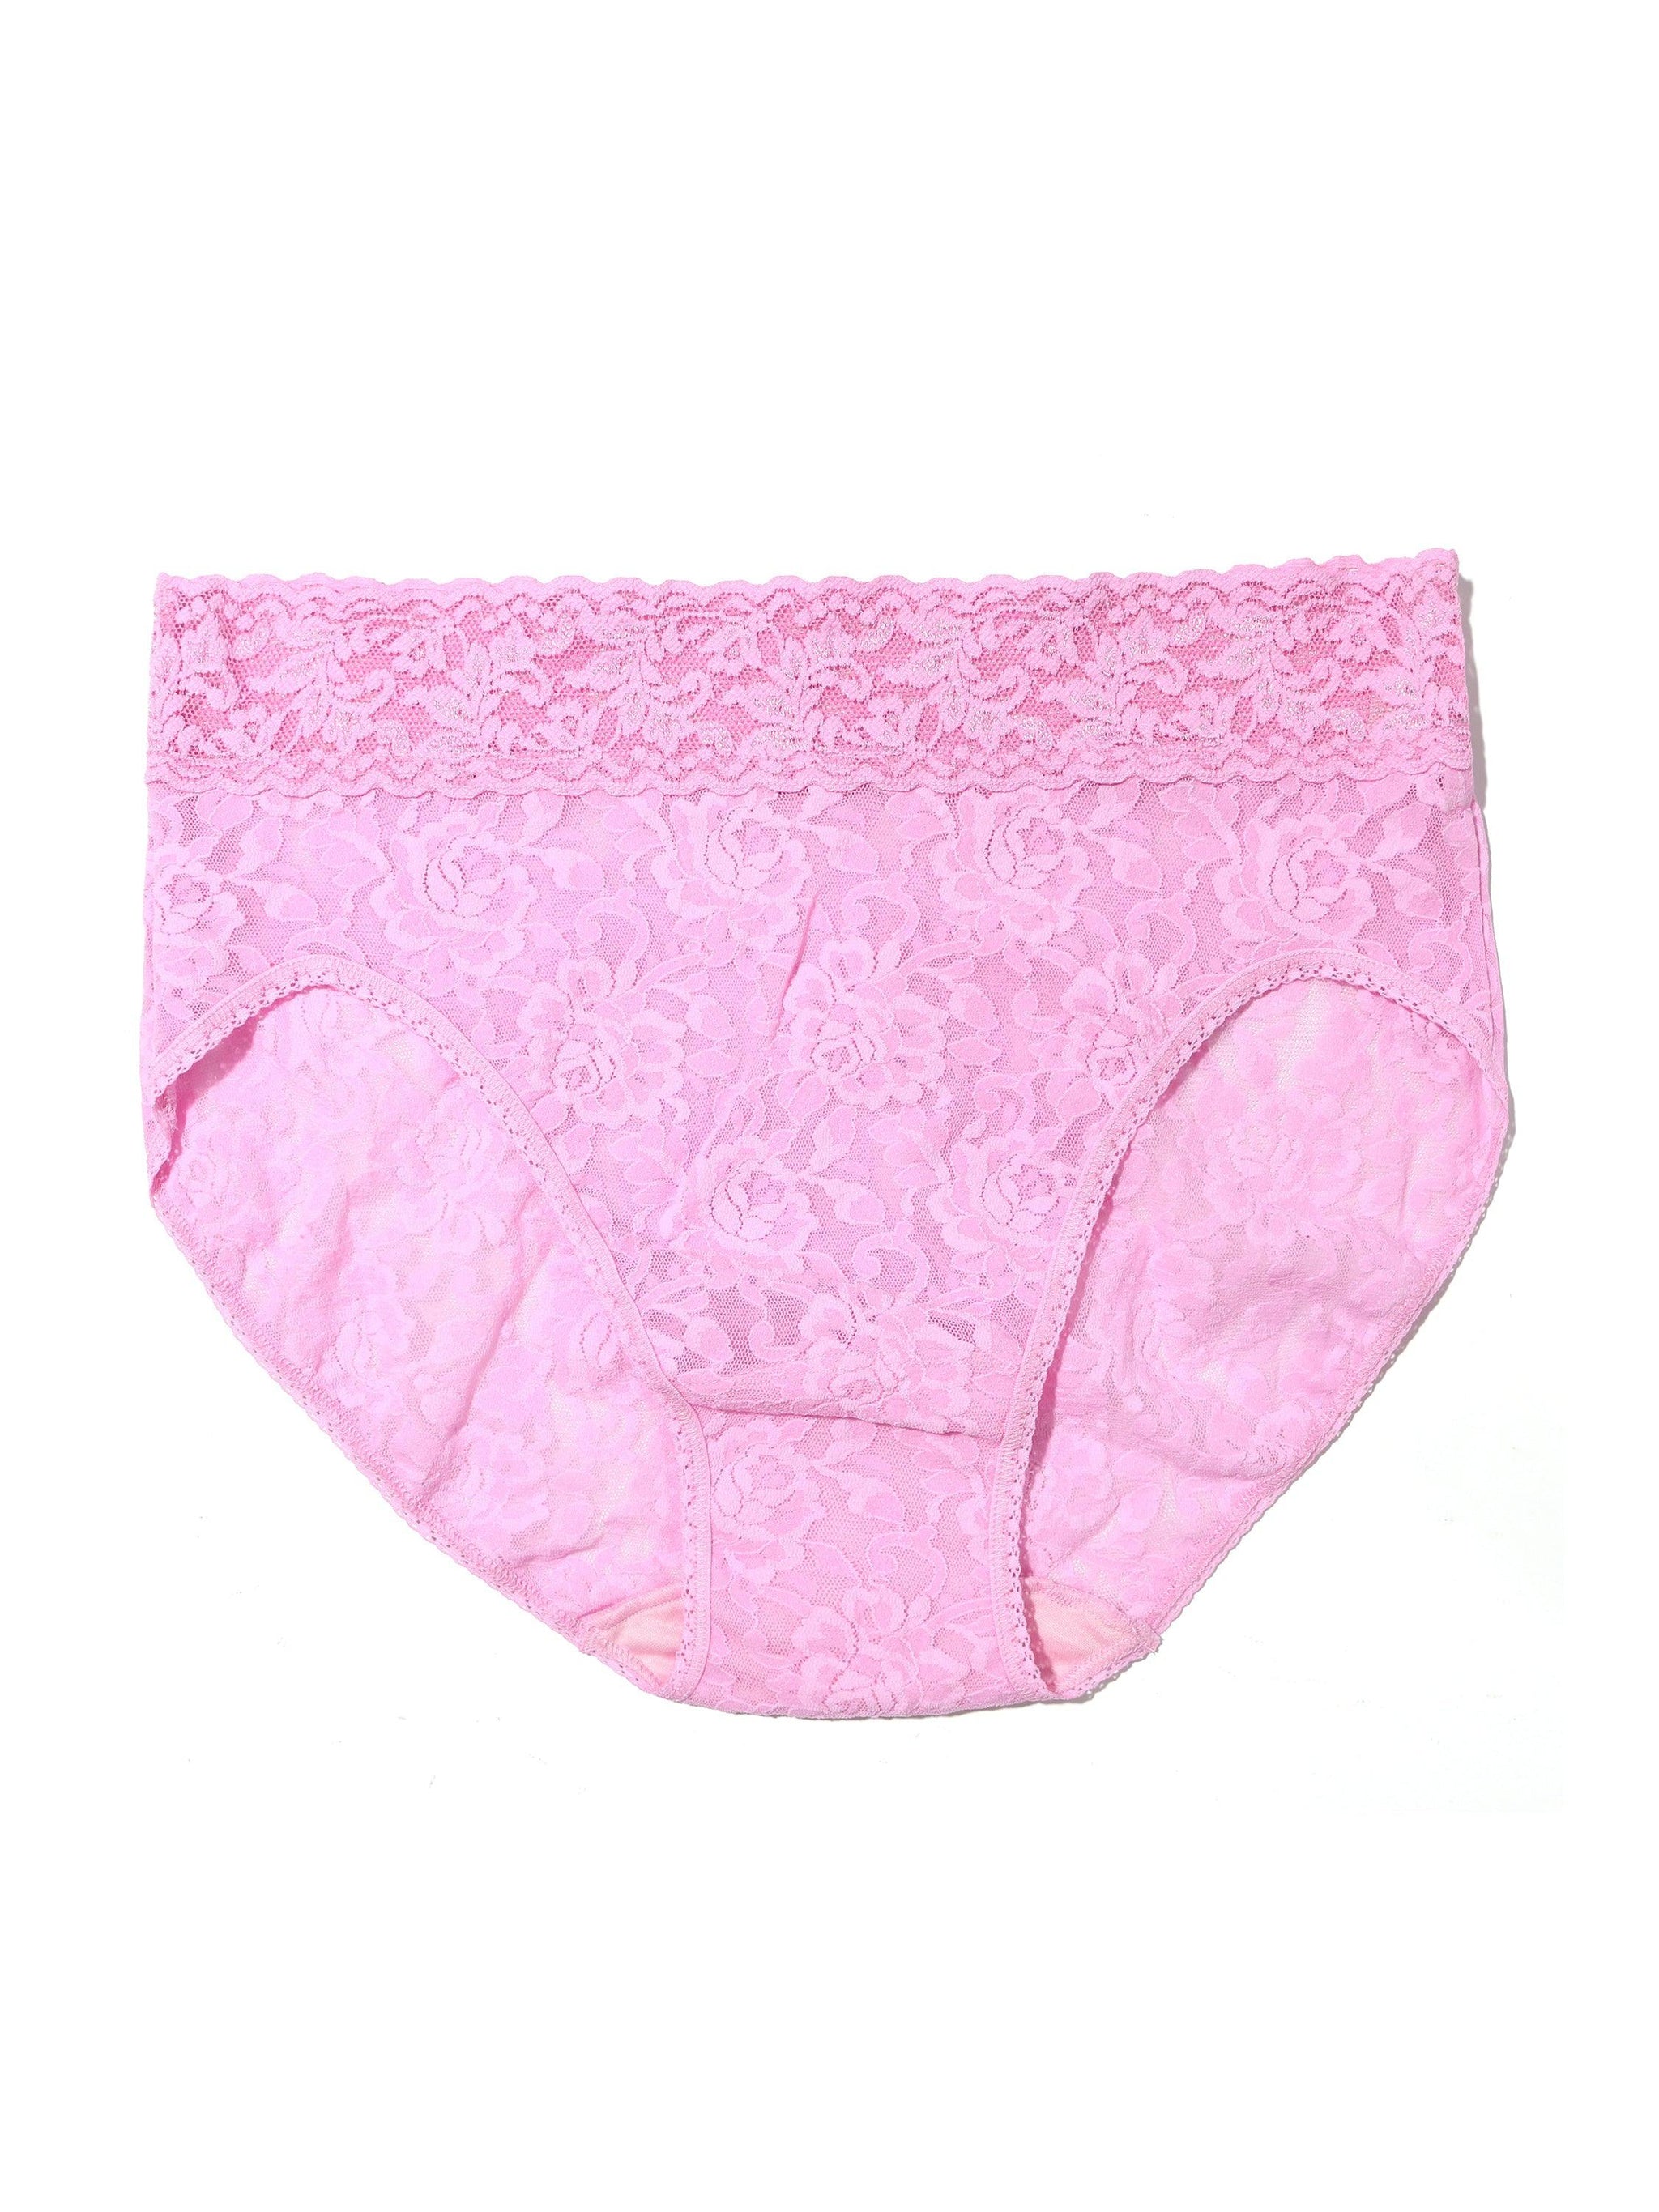 Signature Lace French Brief Cotton Candy Pink Sale